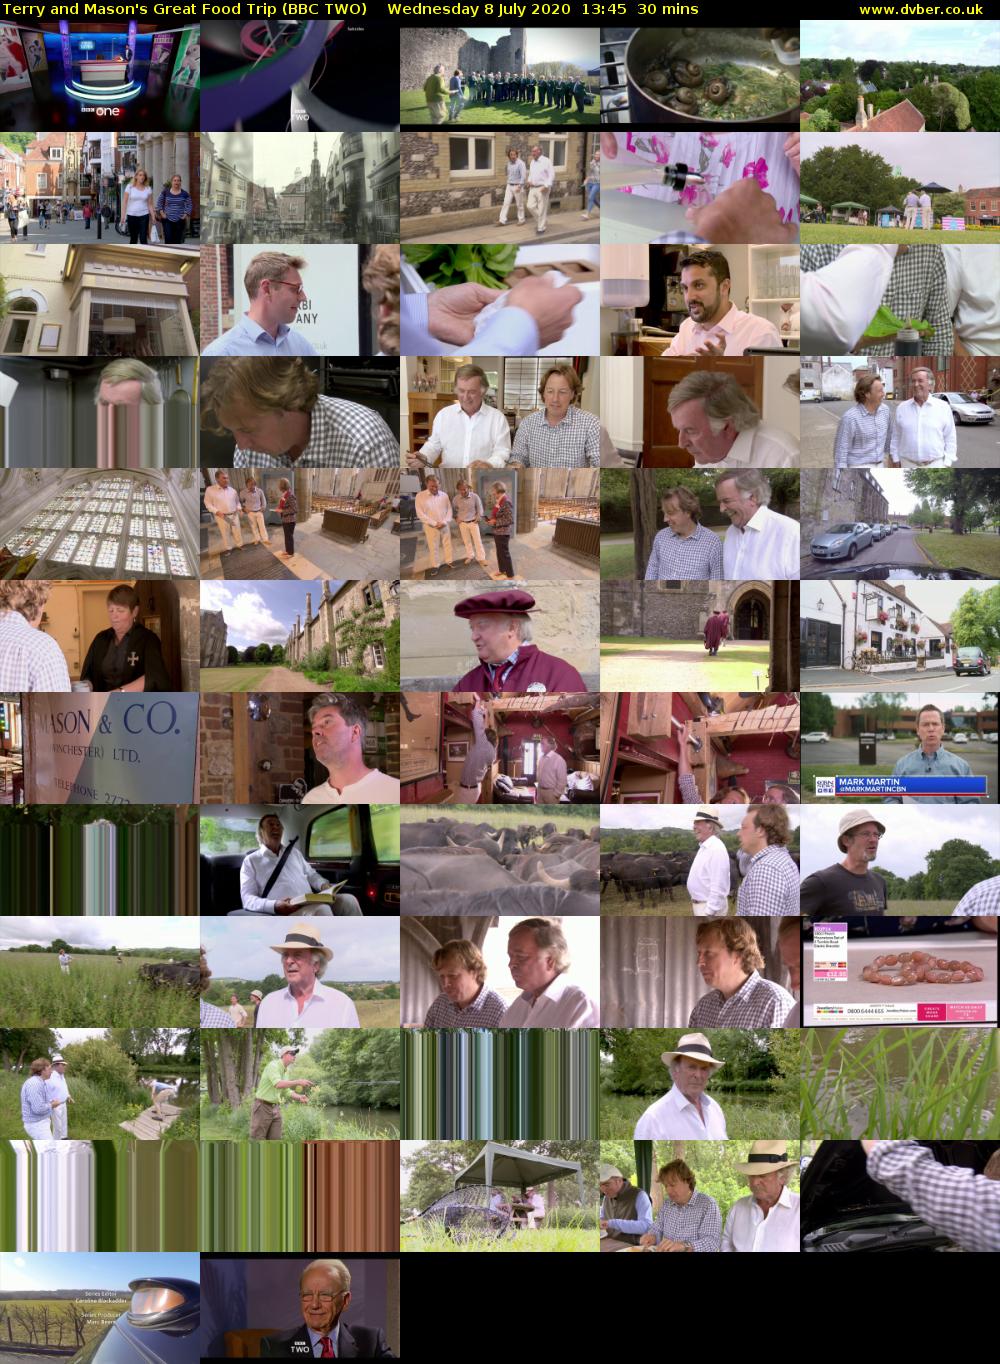 Terry and Mason's Great Food Trip (BBC TWO) Wednesday 8 July 2020 13:45 - 14:15